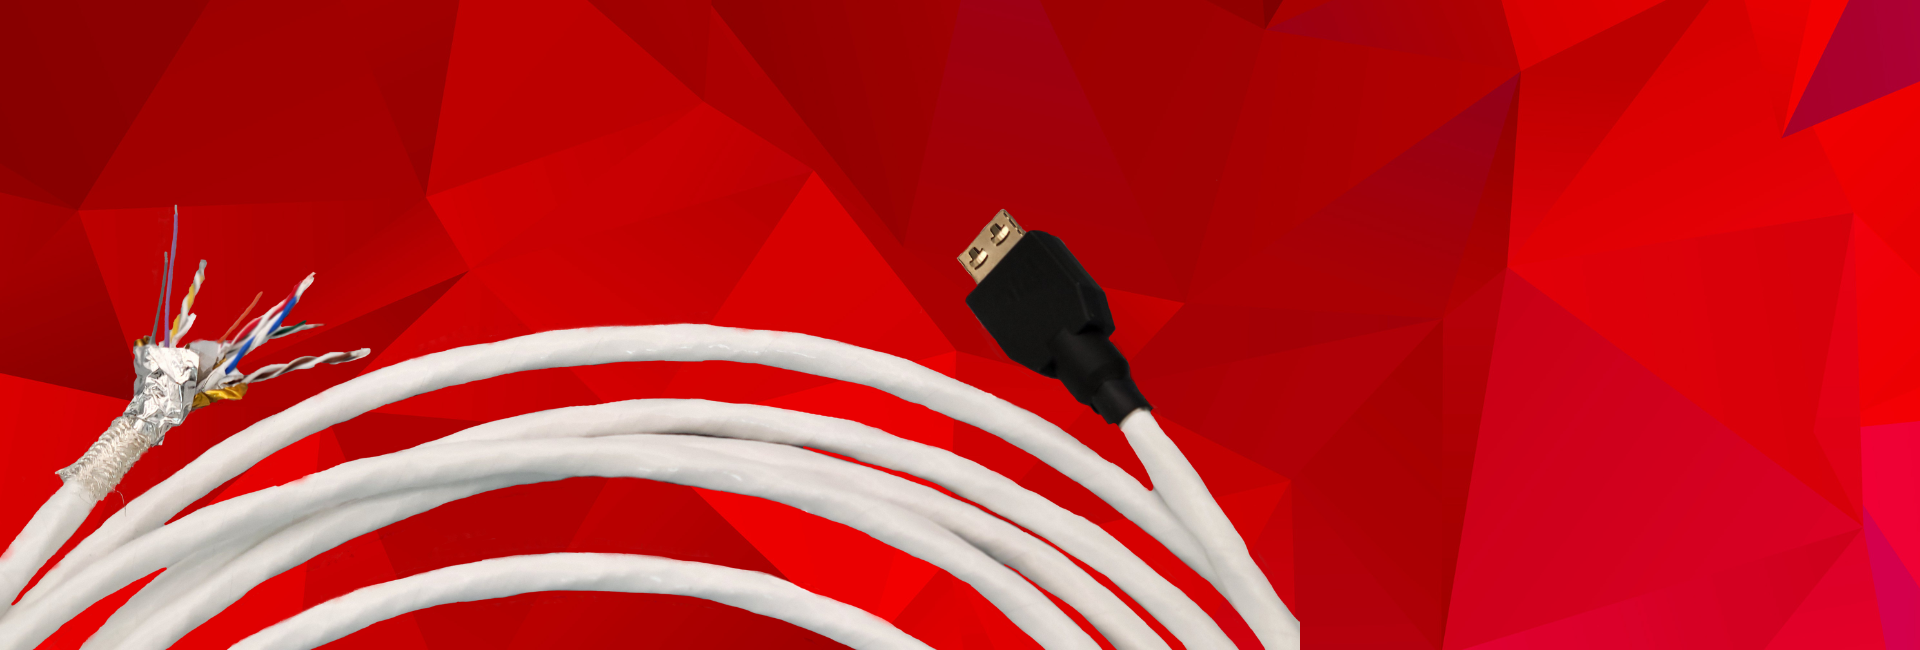 HDMI cable with connector